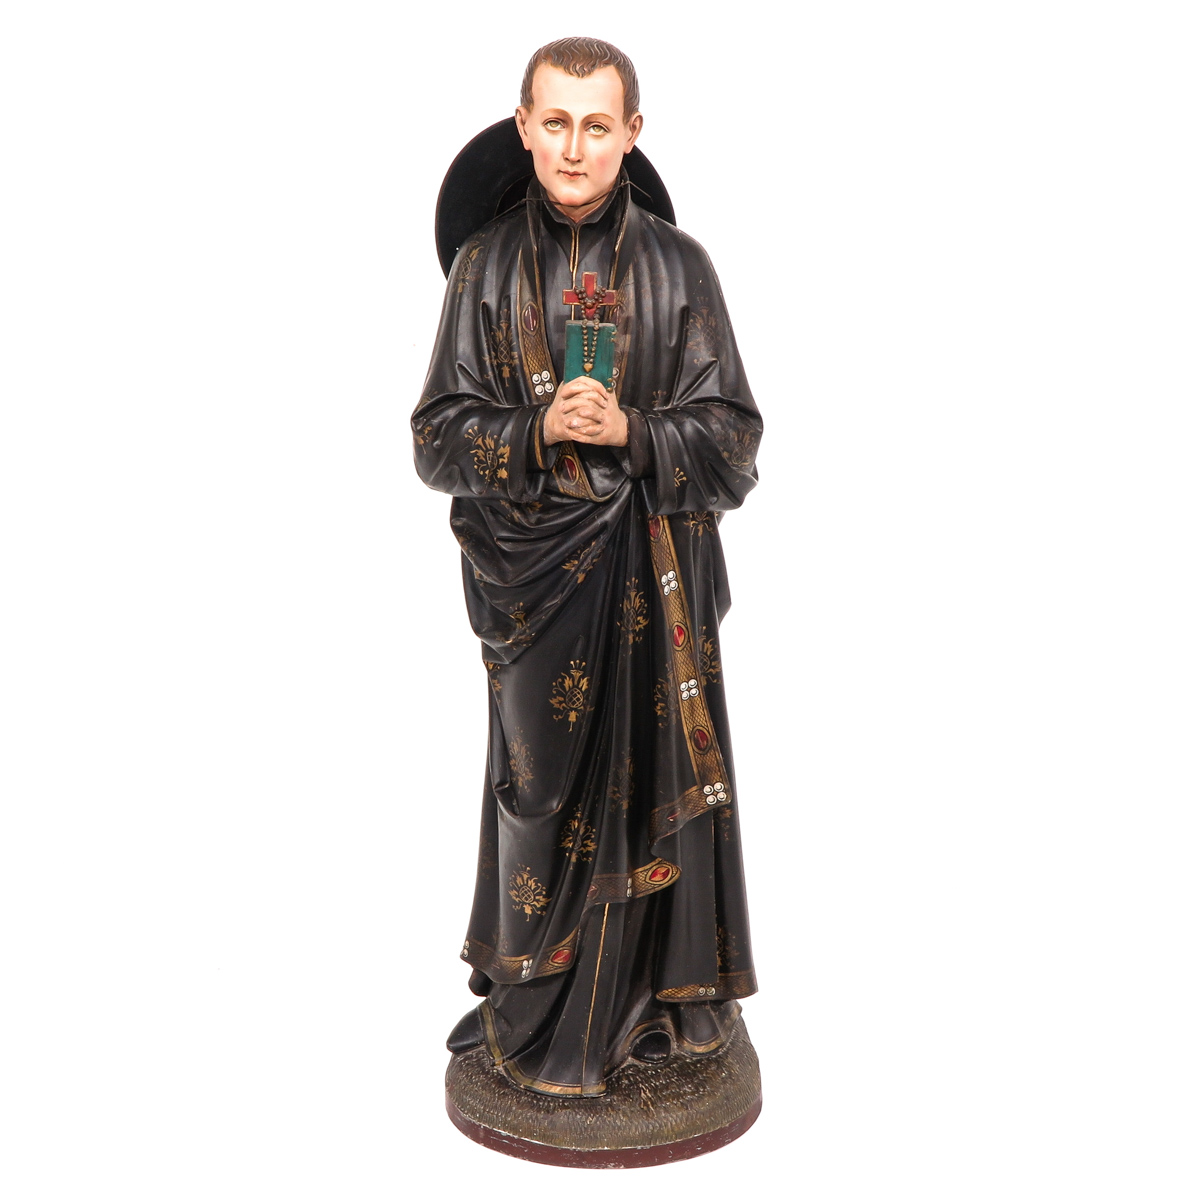 A 19th Cetury Sculpture of Priest